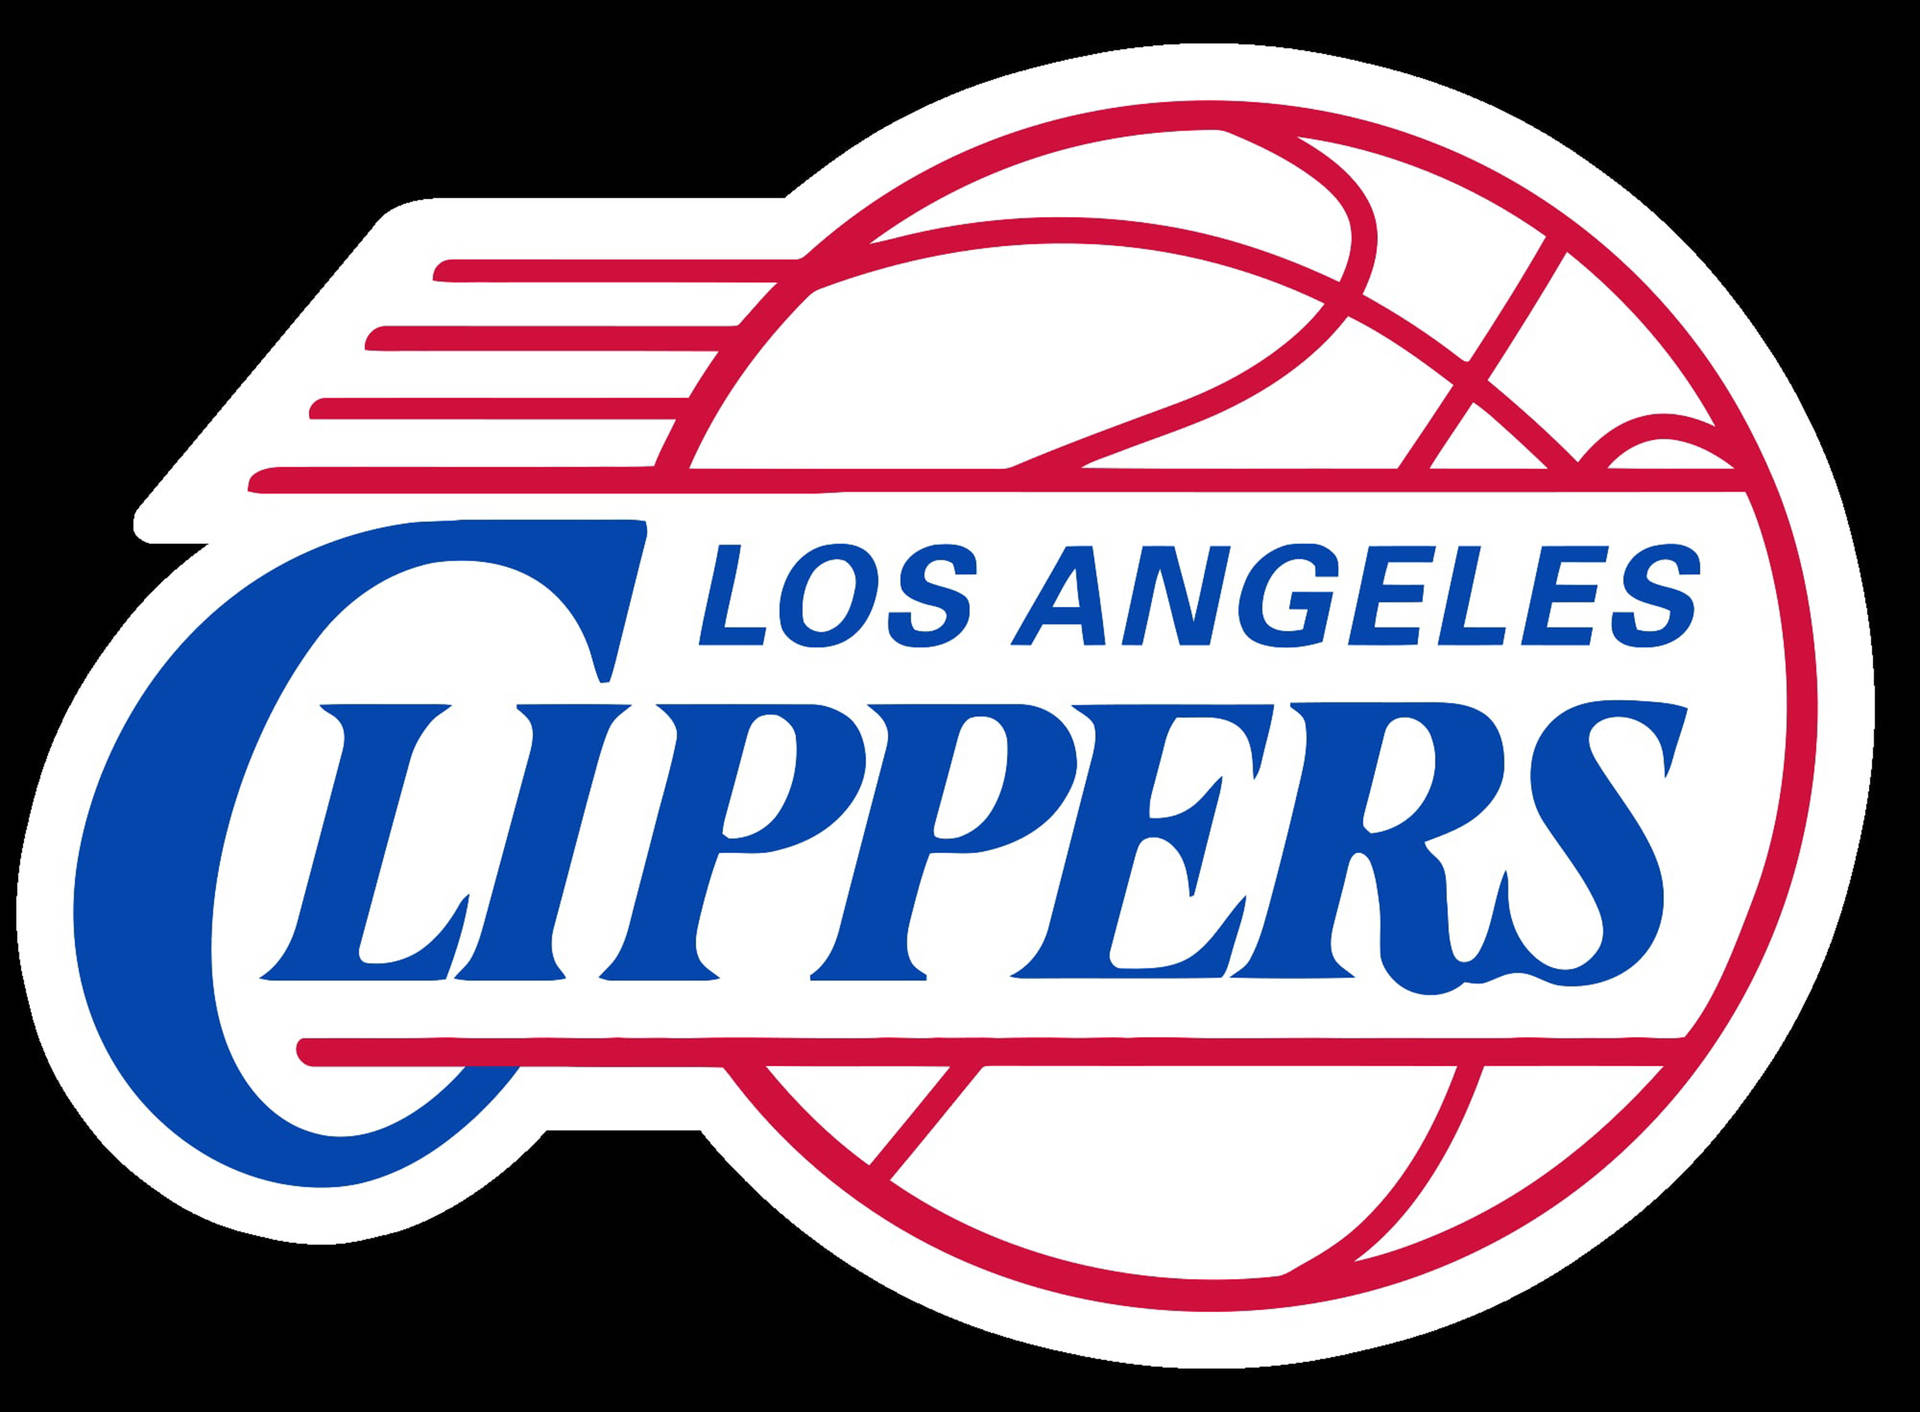 Los Angeles Clippers 2010 Black Background